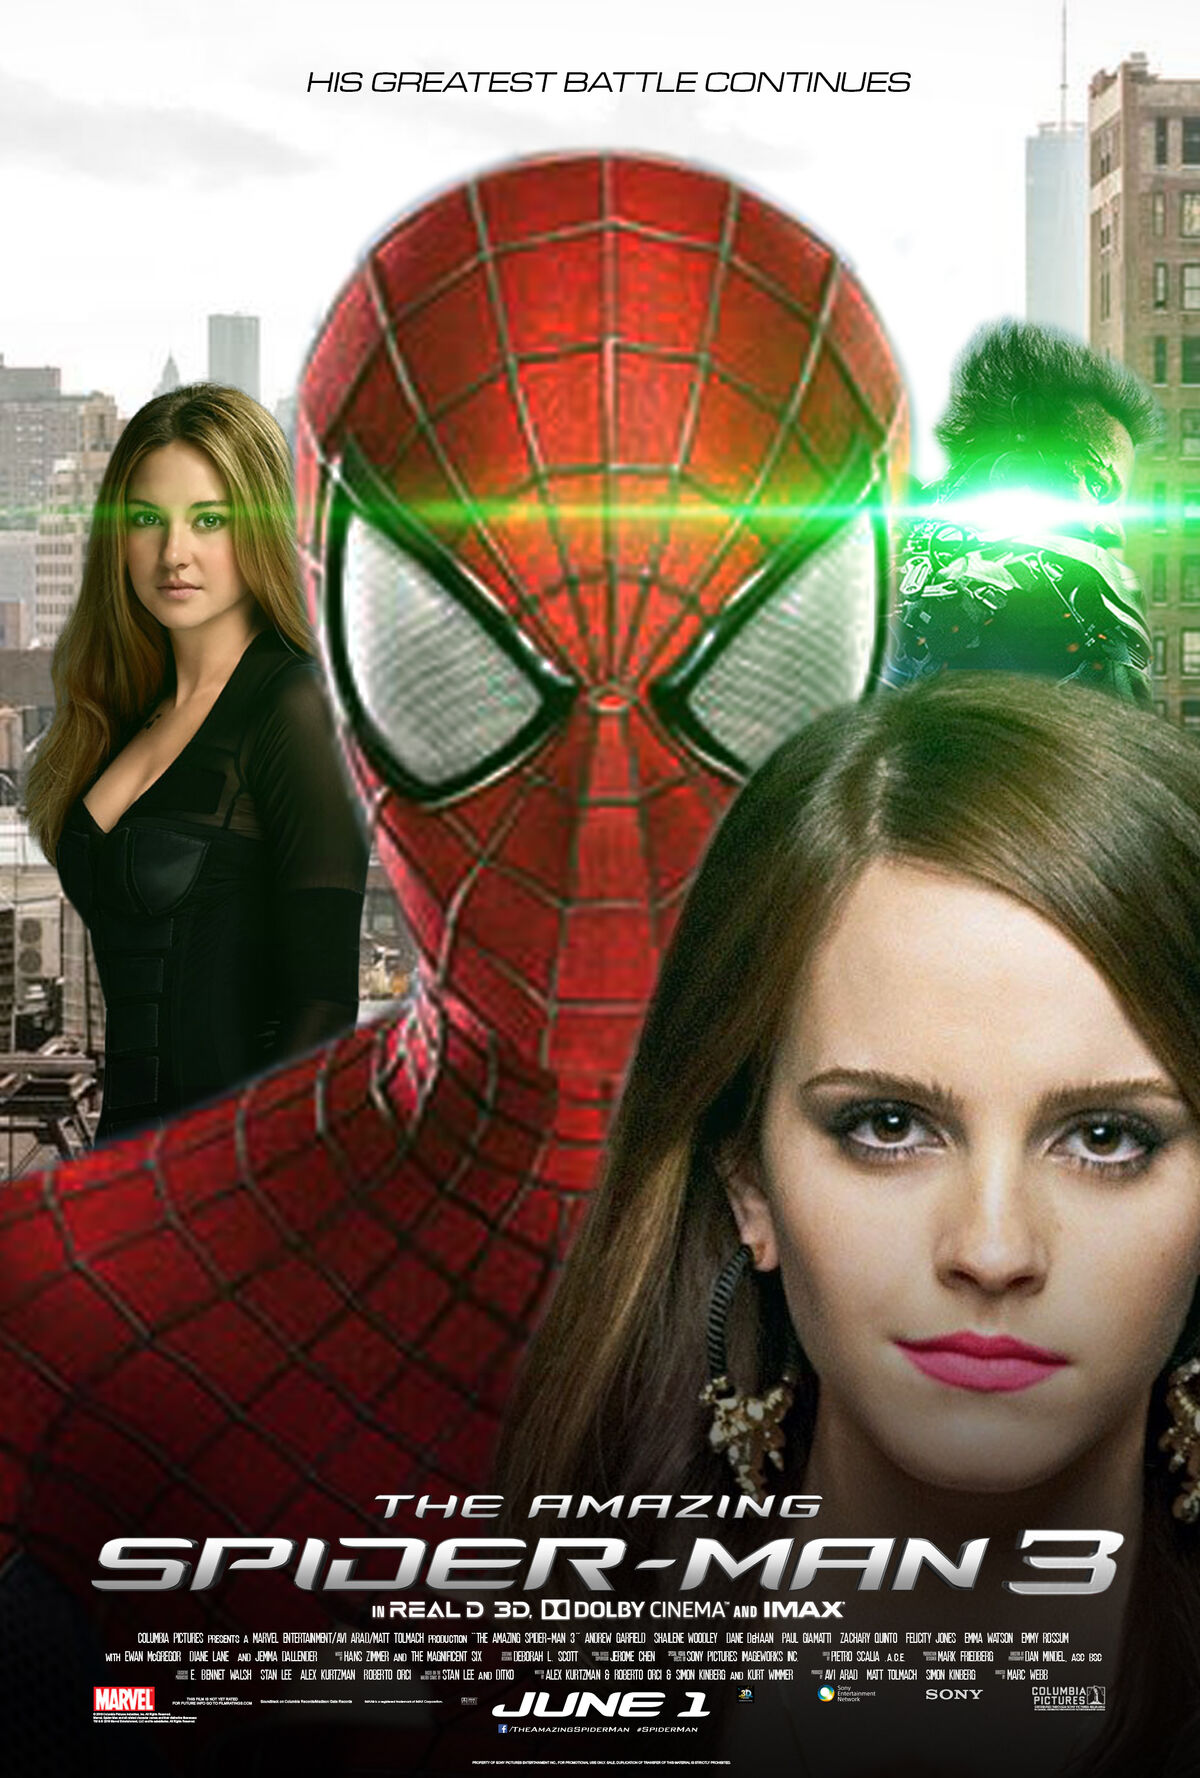 In Defense of 'The Amazing Spider-Man 2